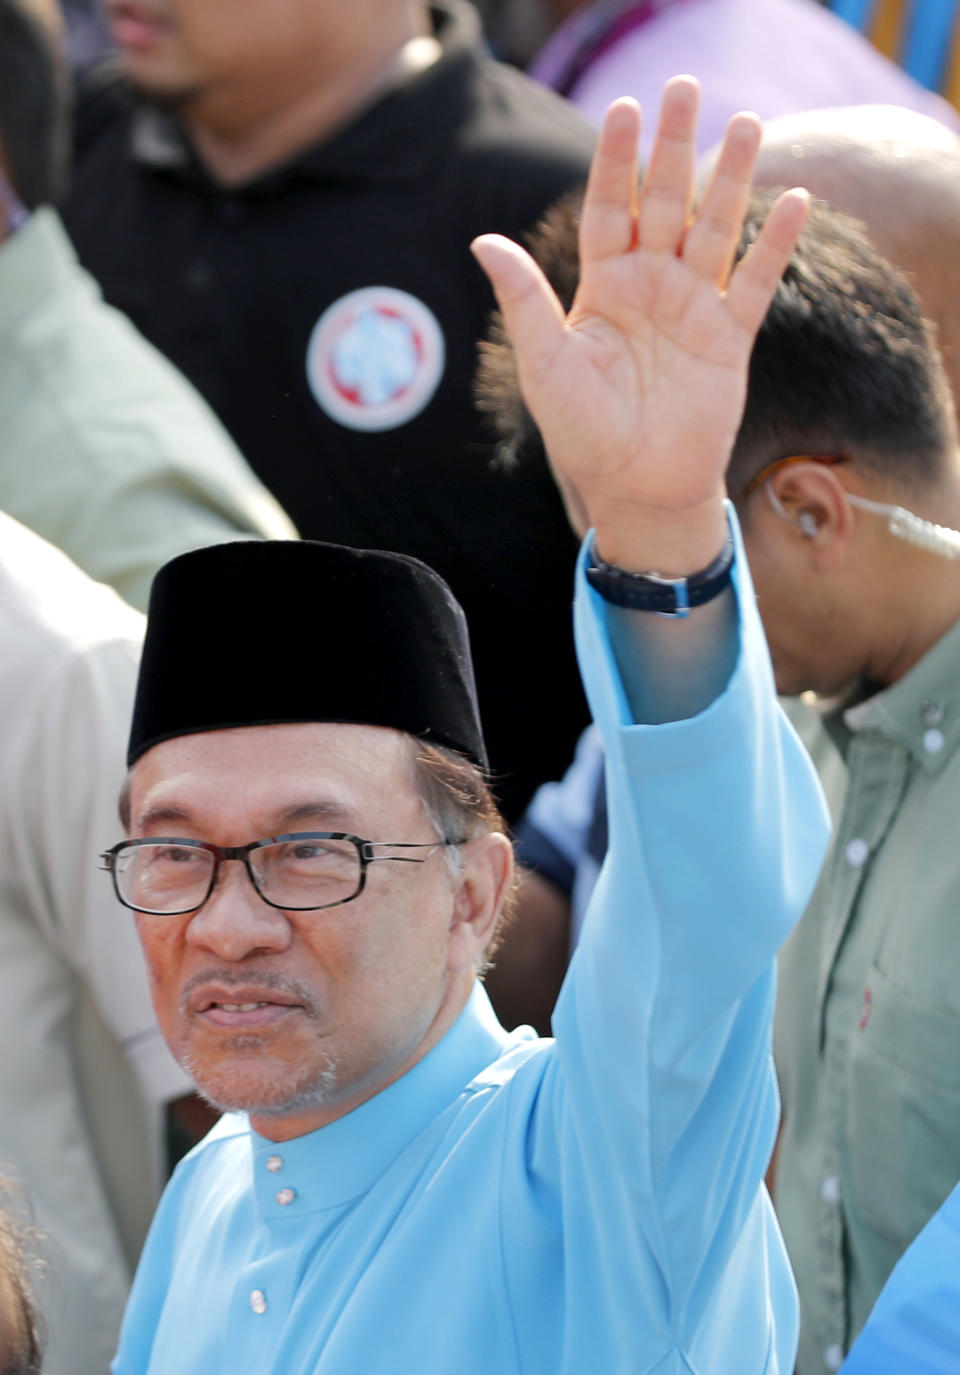 Malaysia's reform icon Anwar Ibrahim waves to his supporters as he arrives for by-election nomination in Port Dickson, Malaysia, Saturday, Sept. 29, 2018. Anwar is contesting by-election in Port Dickson, a southern coastal town after a lawmaker vacated the seat to make way for Anwar Ibrahim's political comeback. (AP Photo/Vincent Thian)